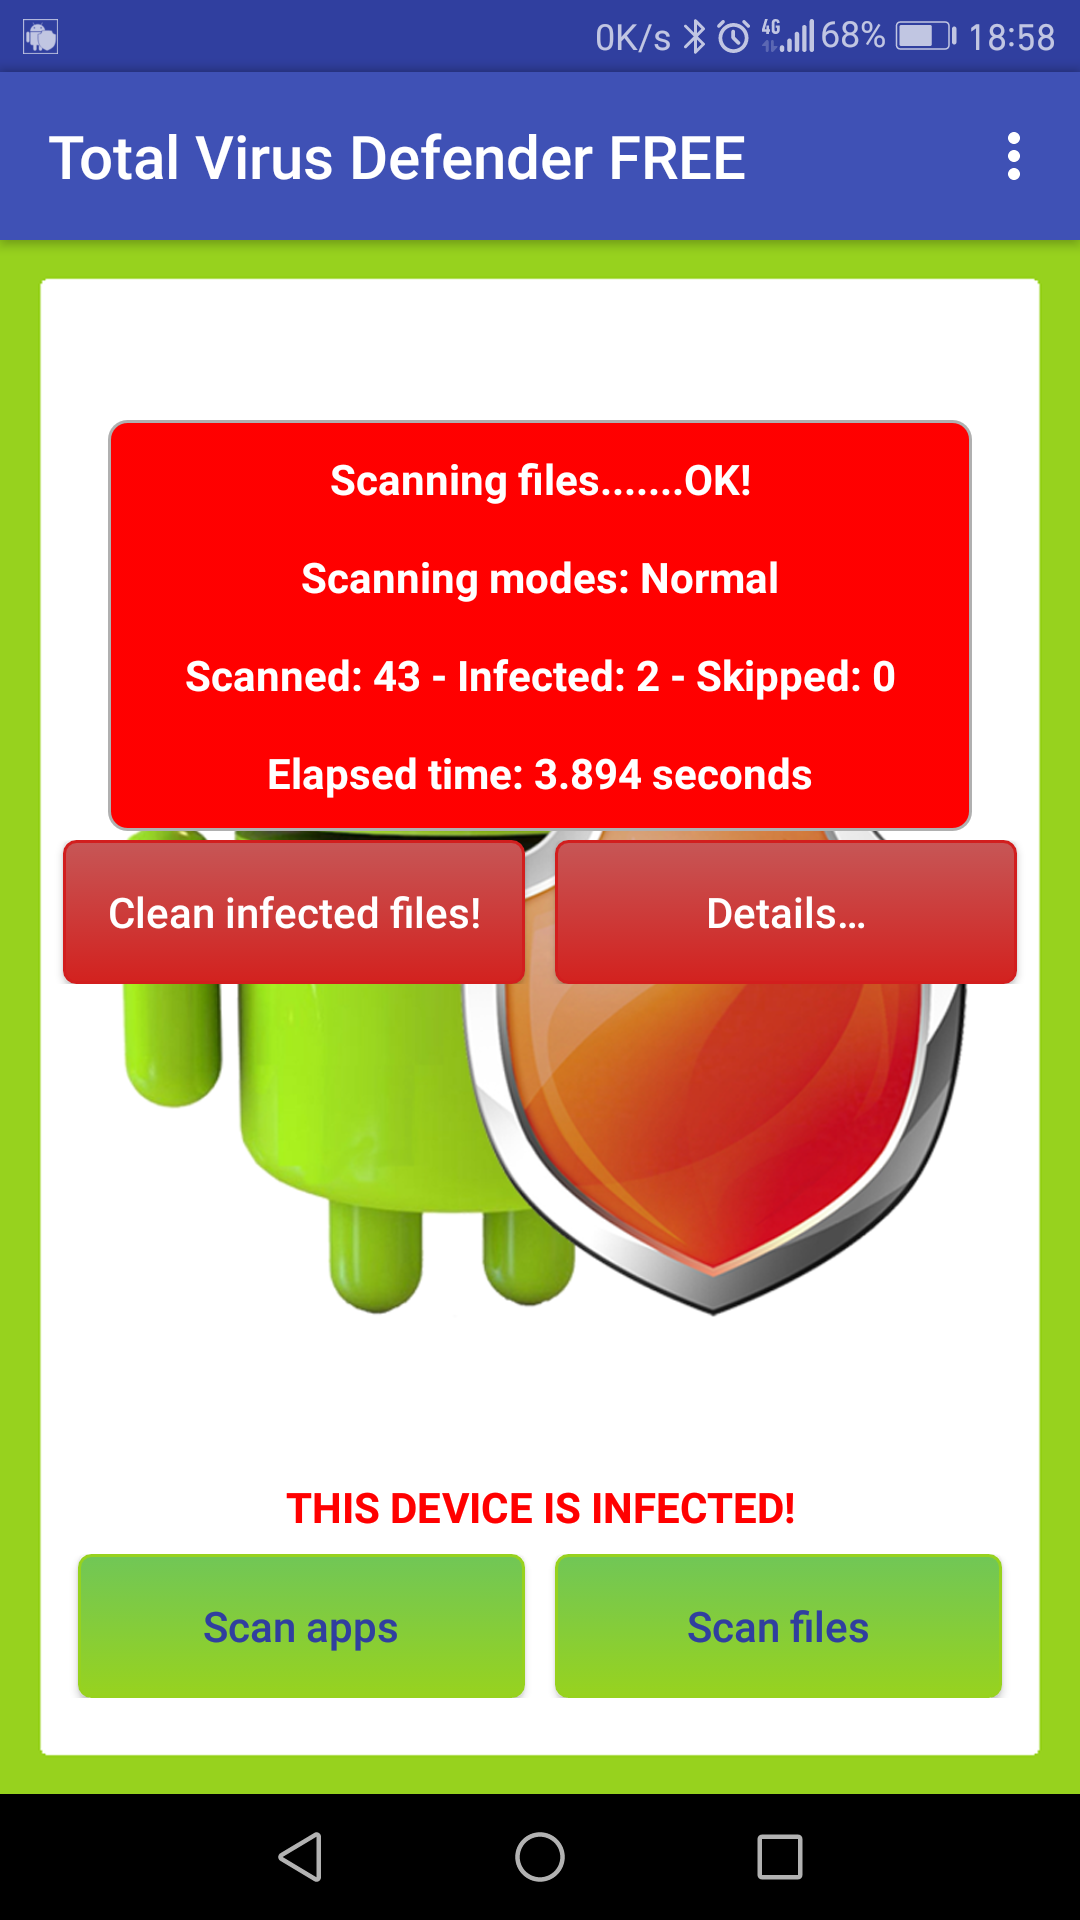 Total Antivirus Defender FREE for Android: new release 2.5.5 is online.